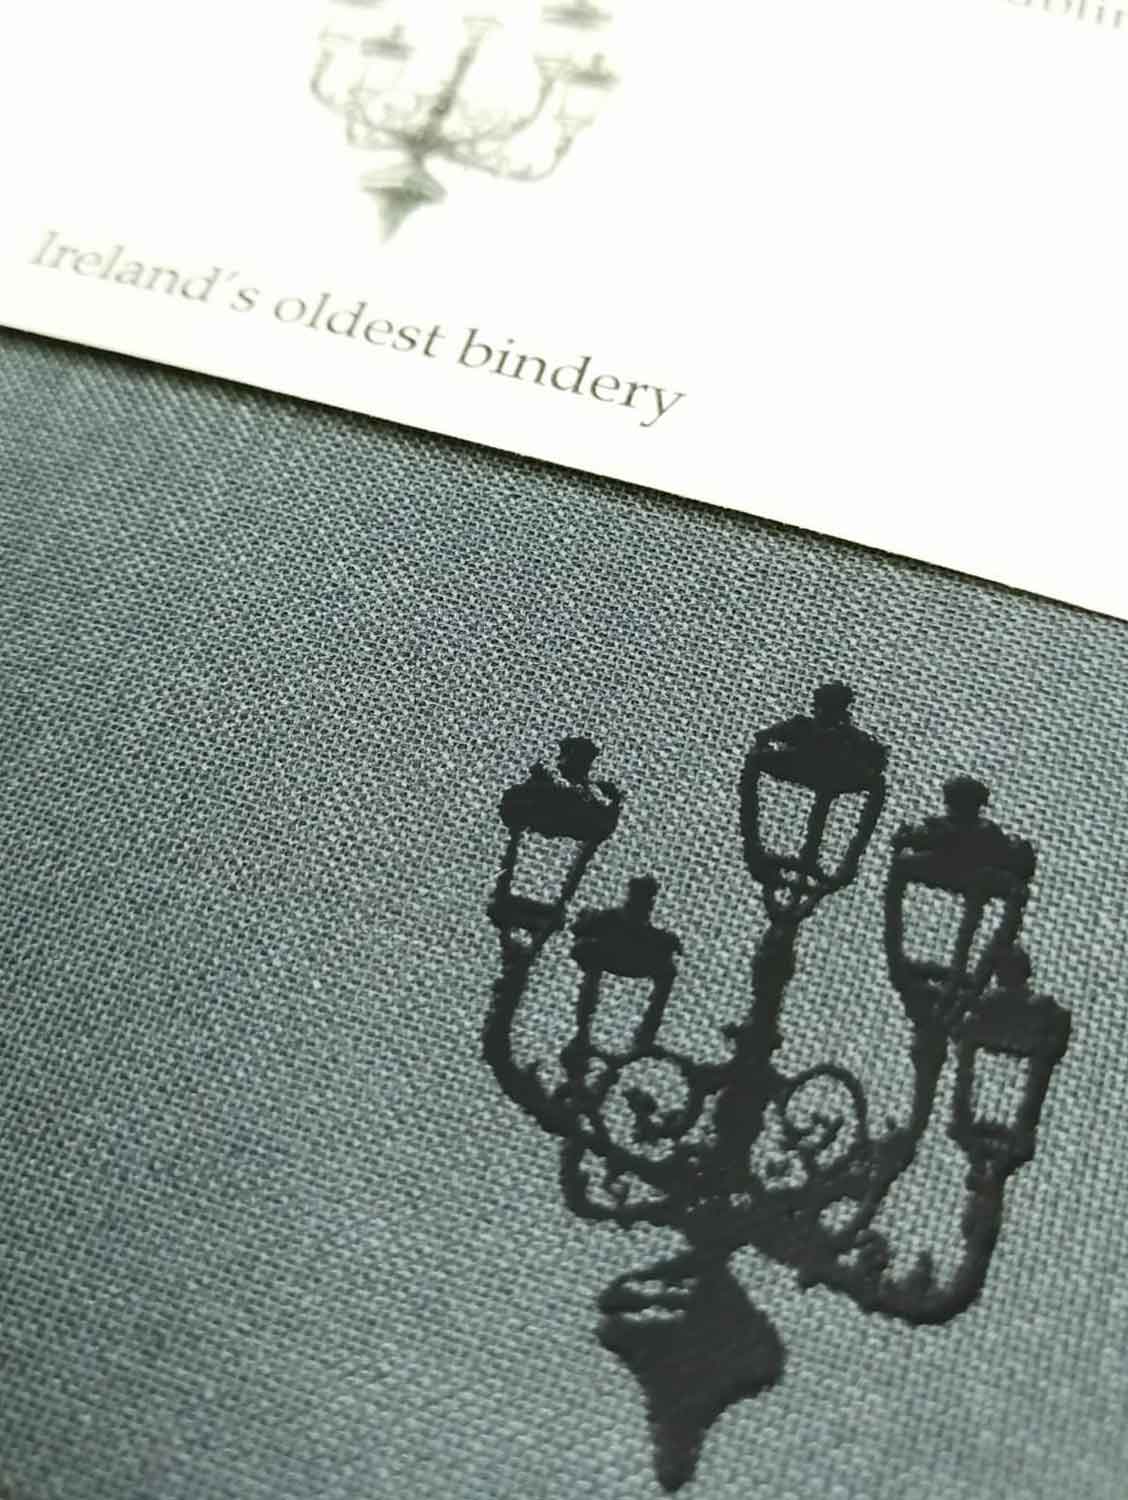 A close up of the lamp illustration also showing the texture of the grey cloth cover.